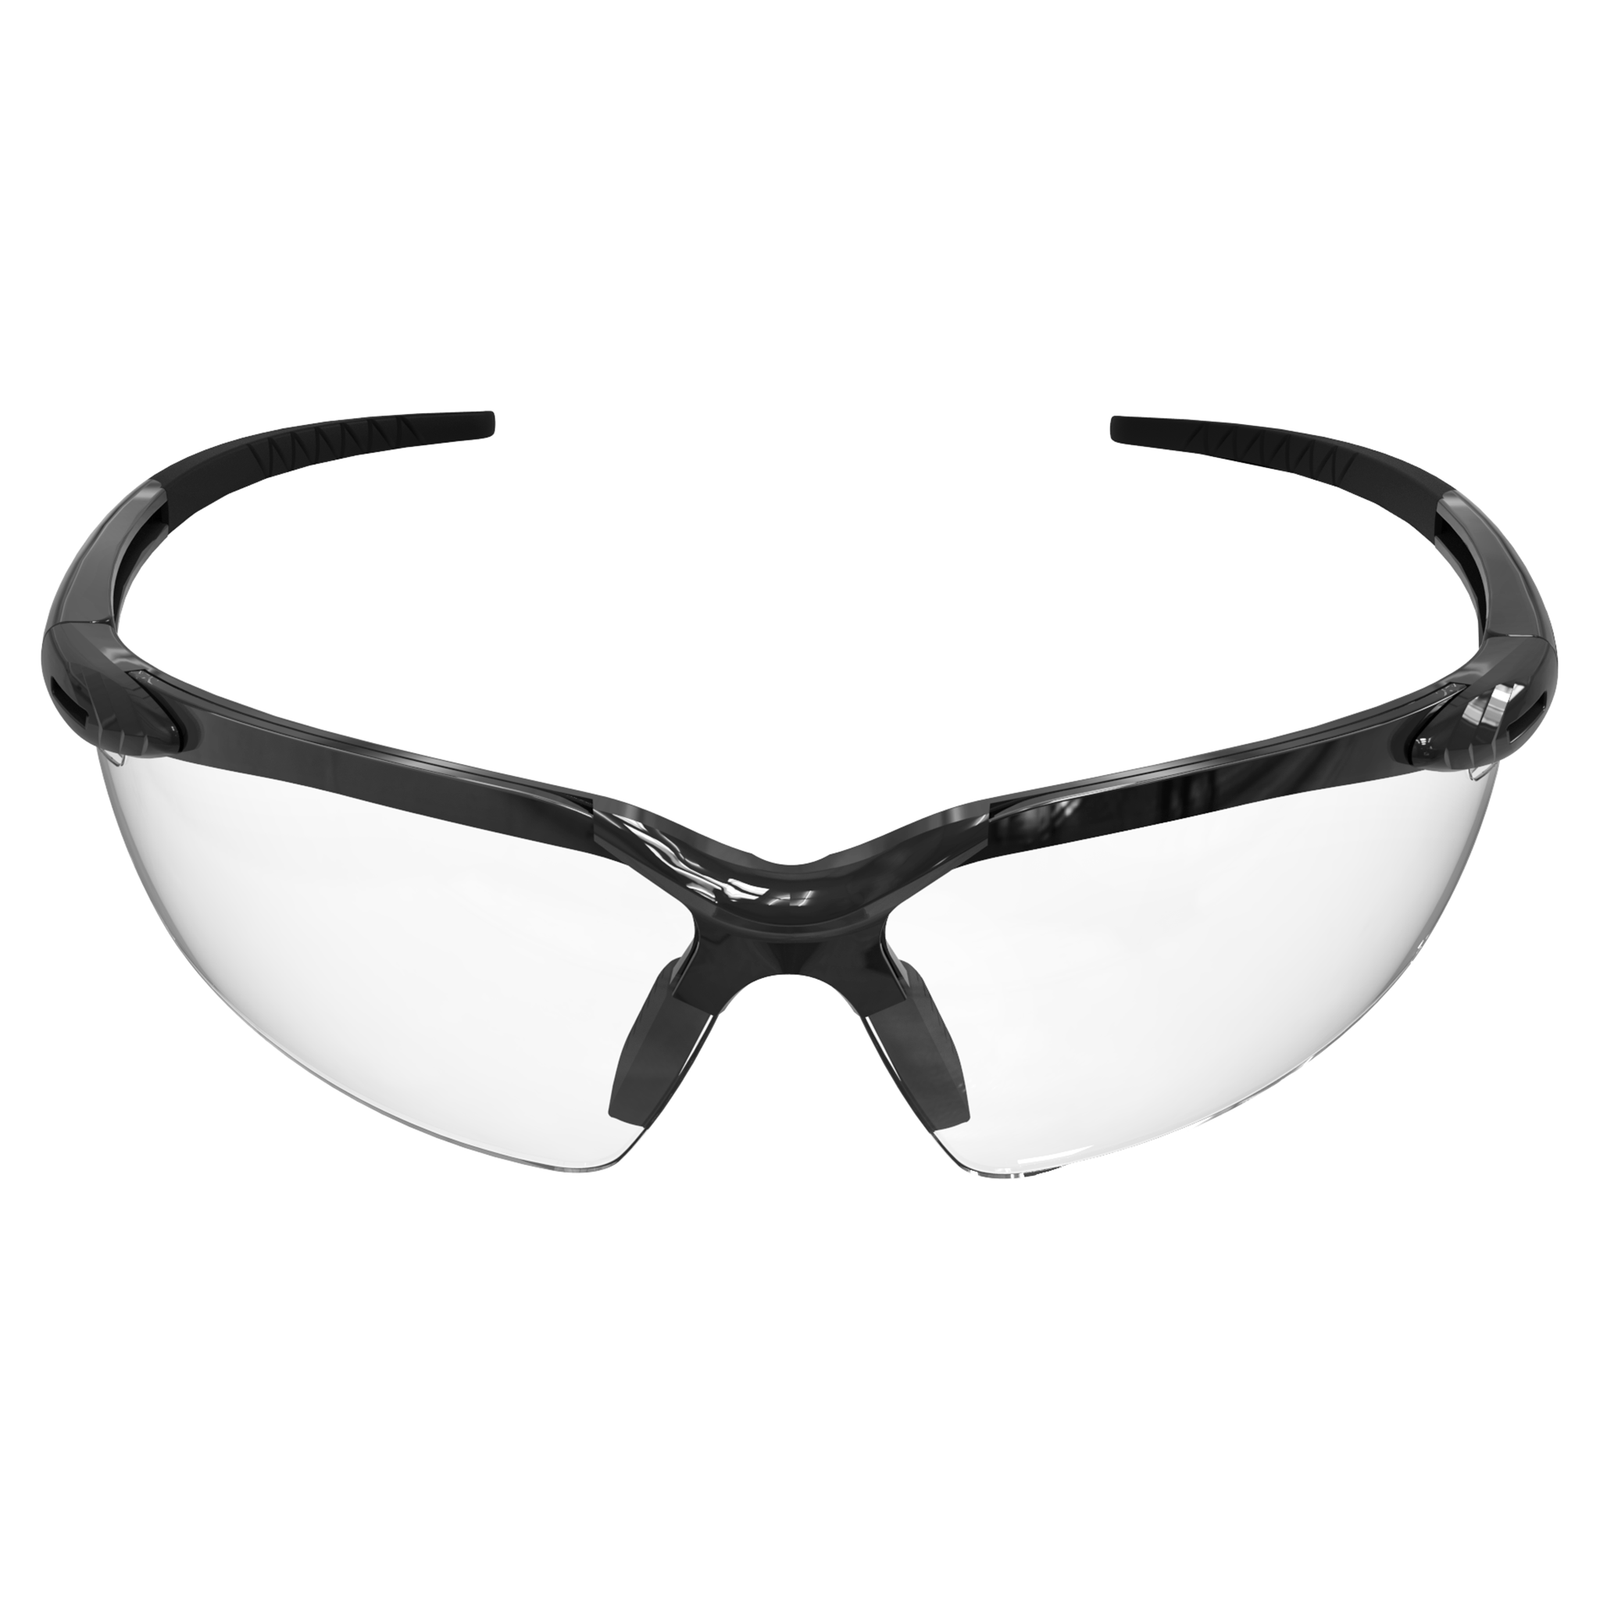 Wrap around high impact safety glasses with flexible rubber temple with clear lenses and black frame and temples